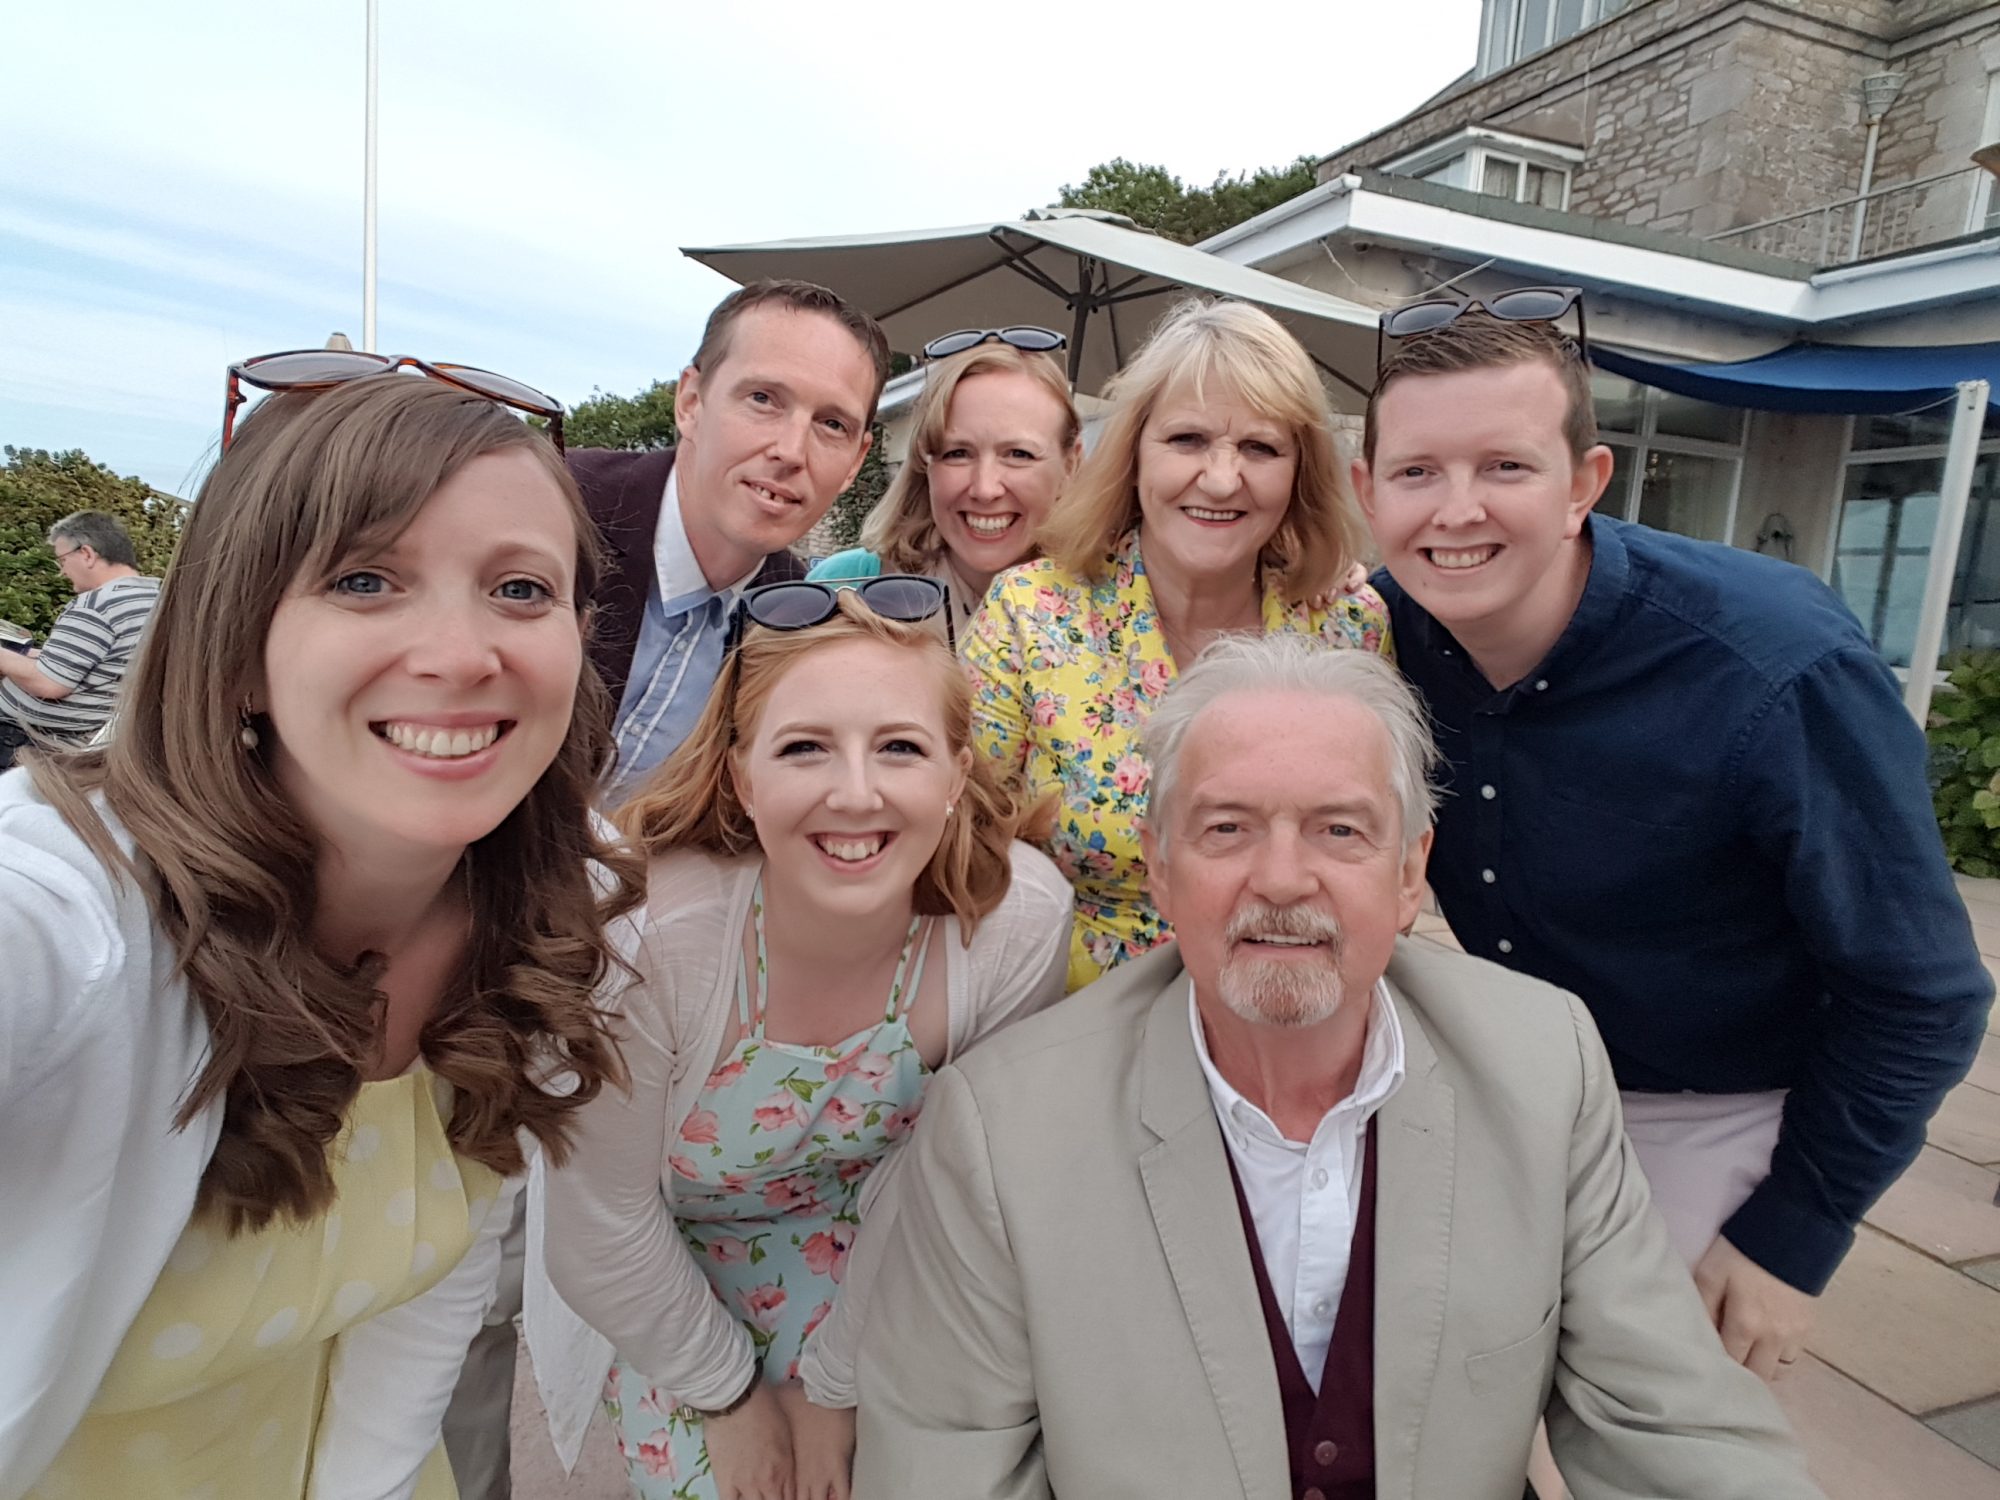 The Drein family pose at a wedding for a selfie.